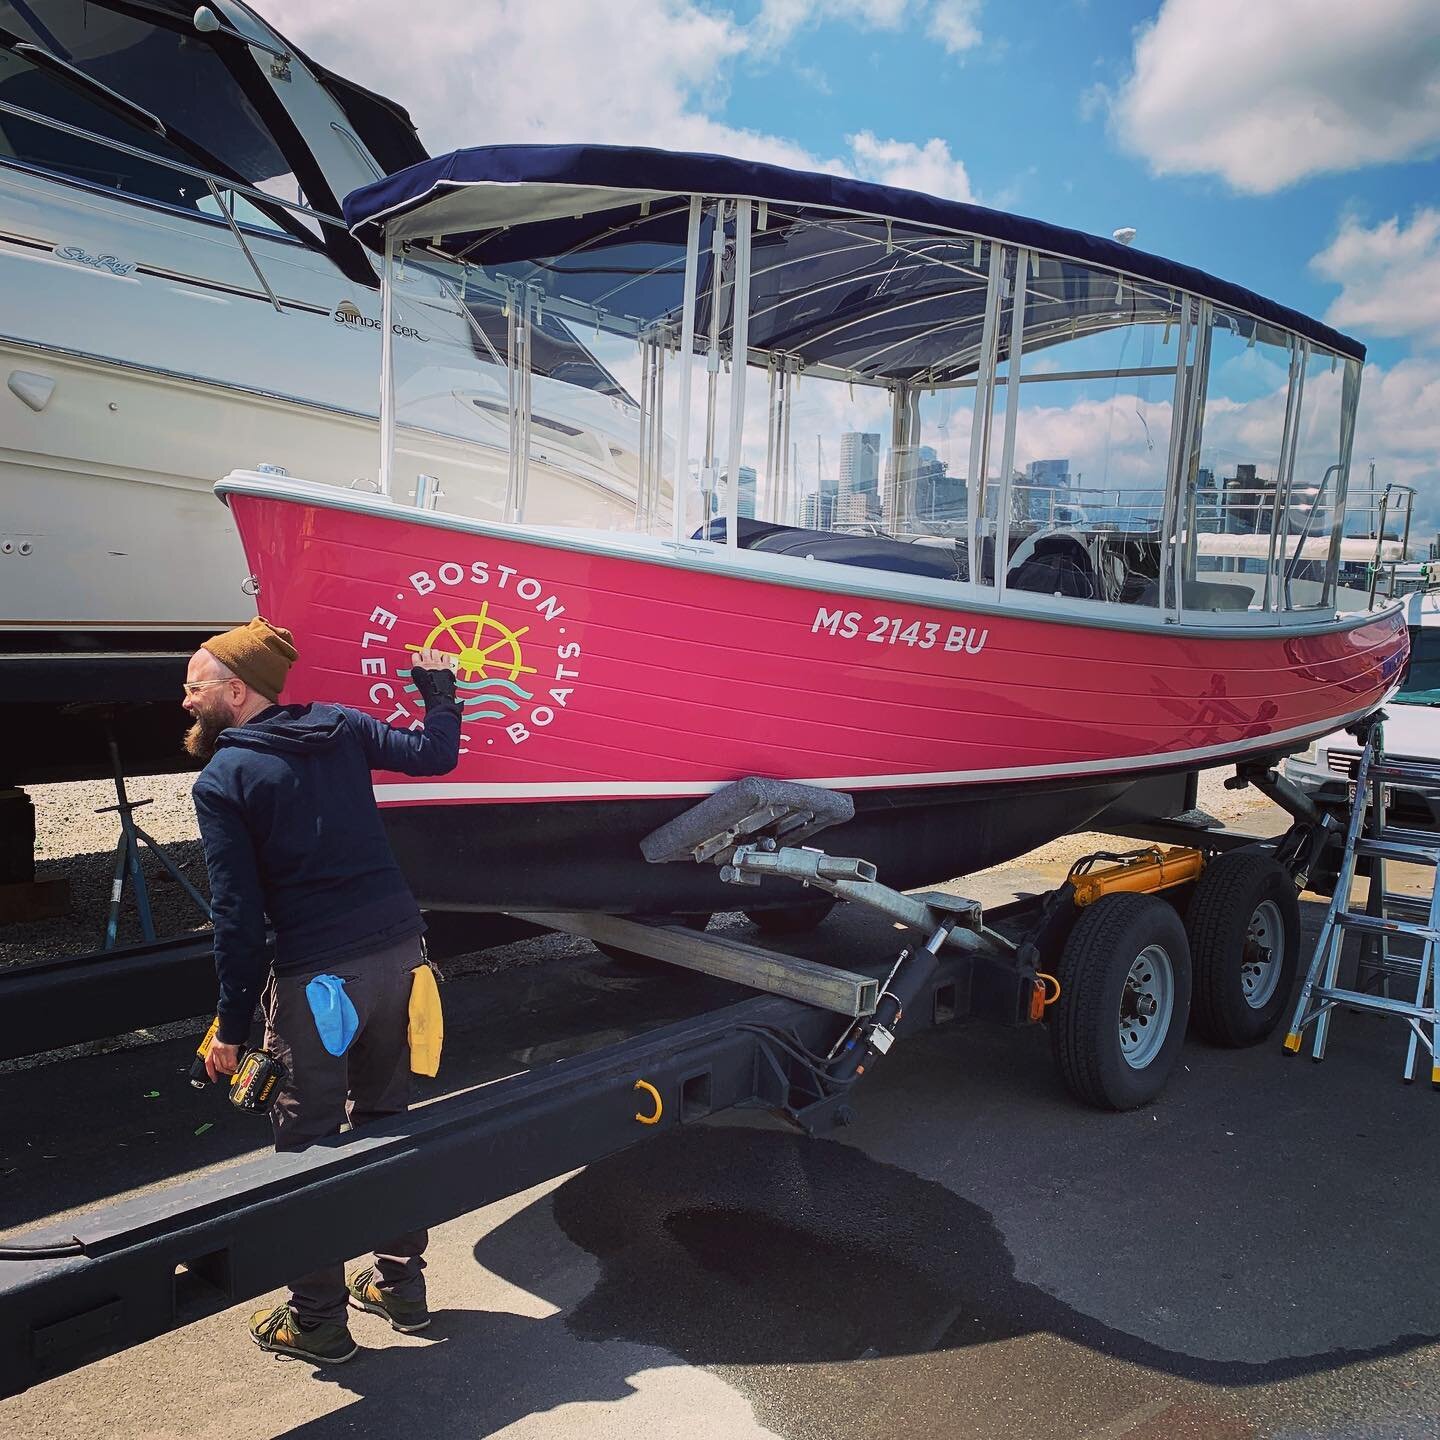 Getting the fleet @bostonelectricboats ready for the glorious weather ahead! #boatlife #vinylgraphics #shanesigns